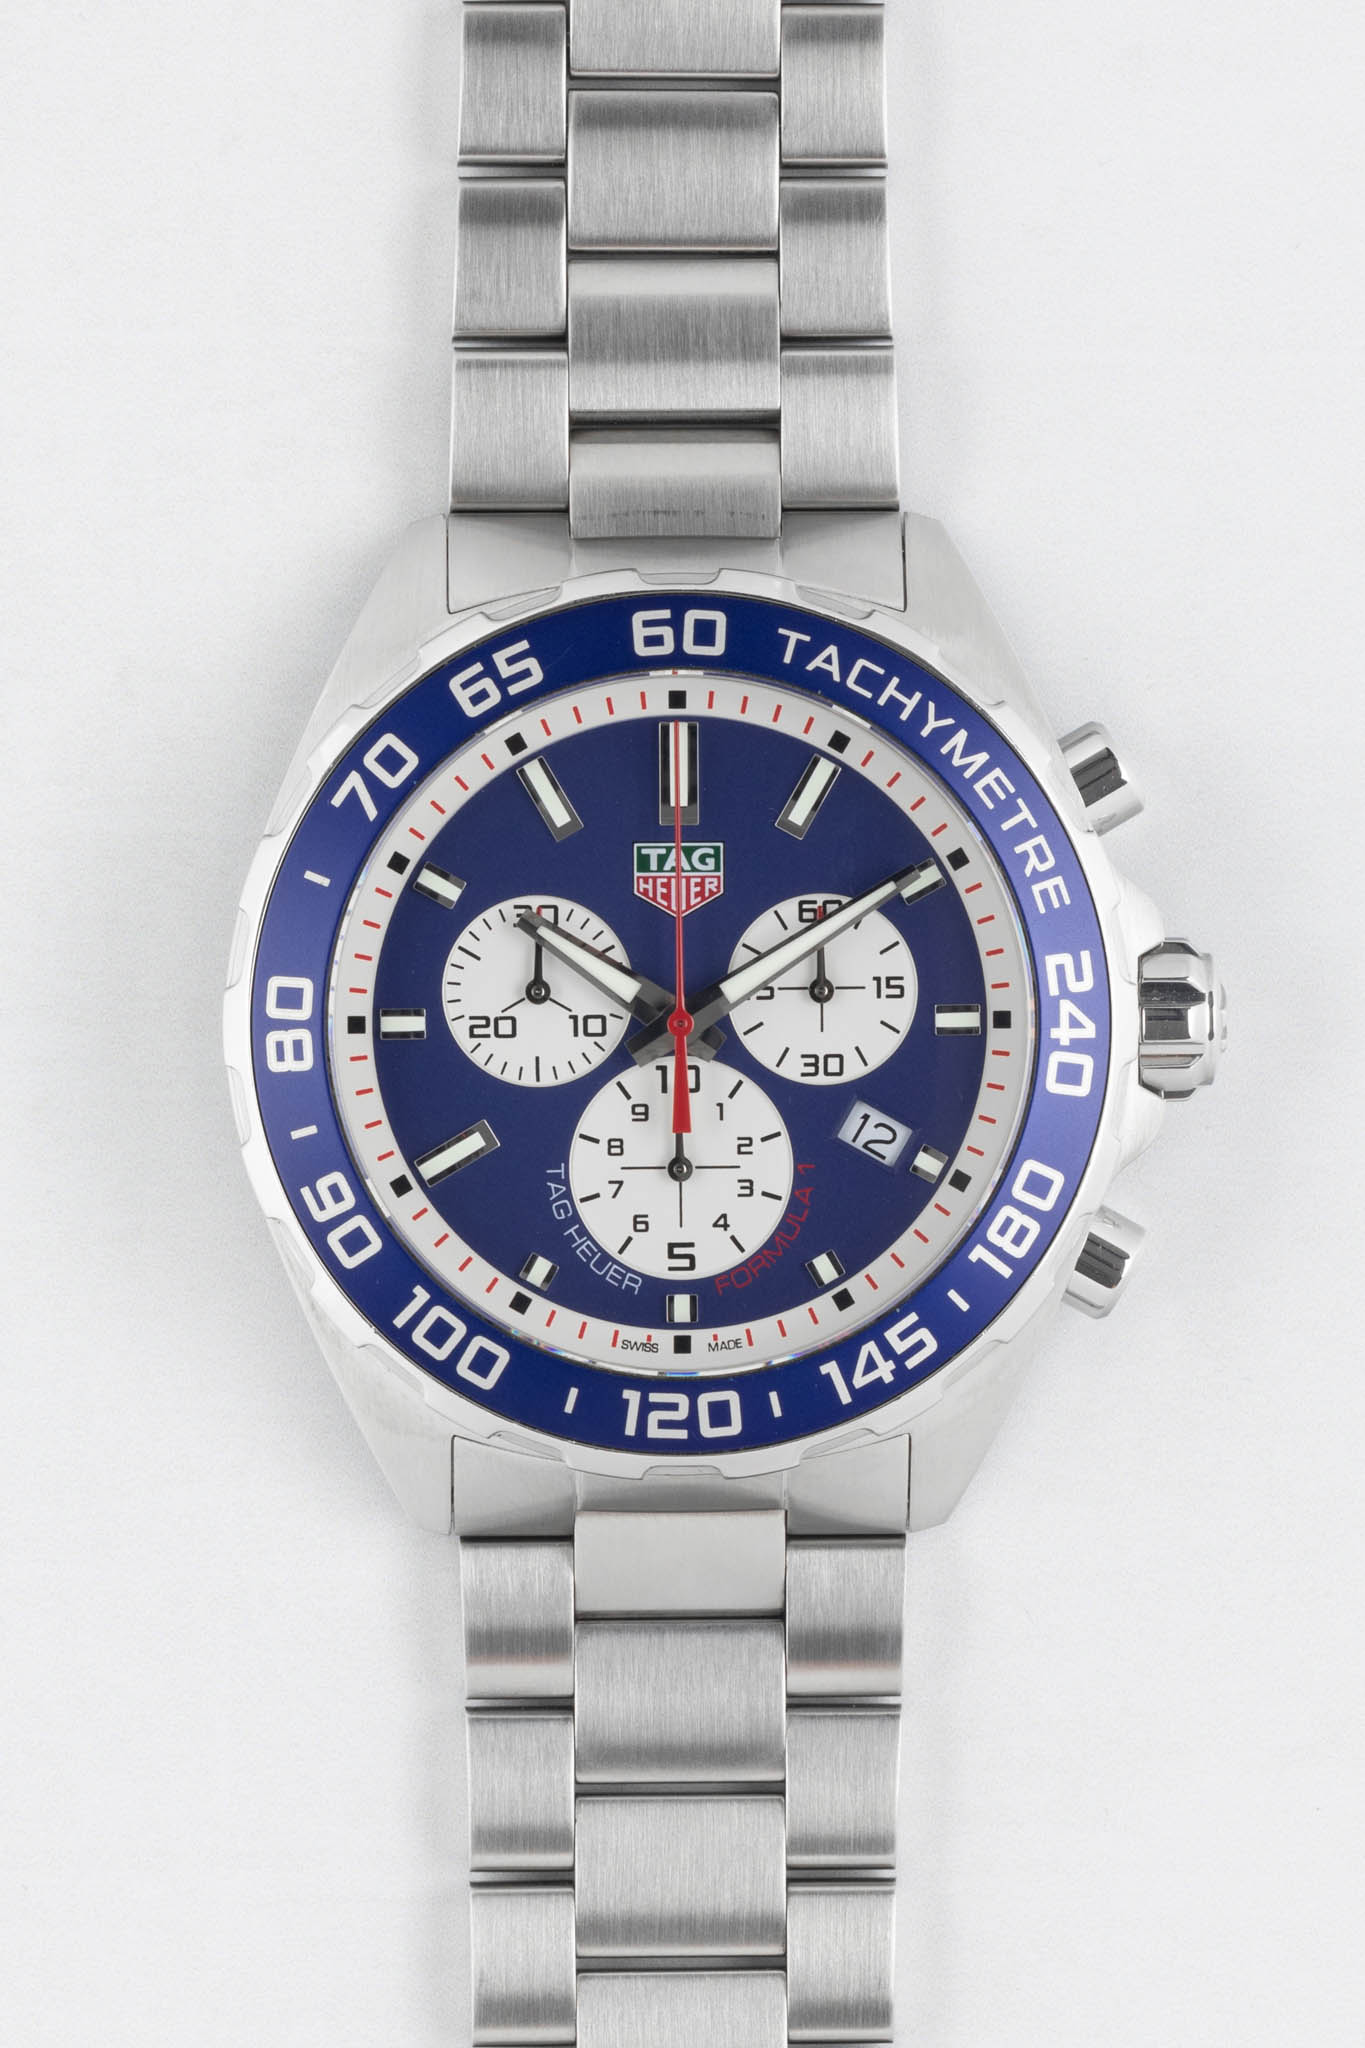 Heuer Formula 1 Red Bull Edition Watch Obsession Uk